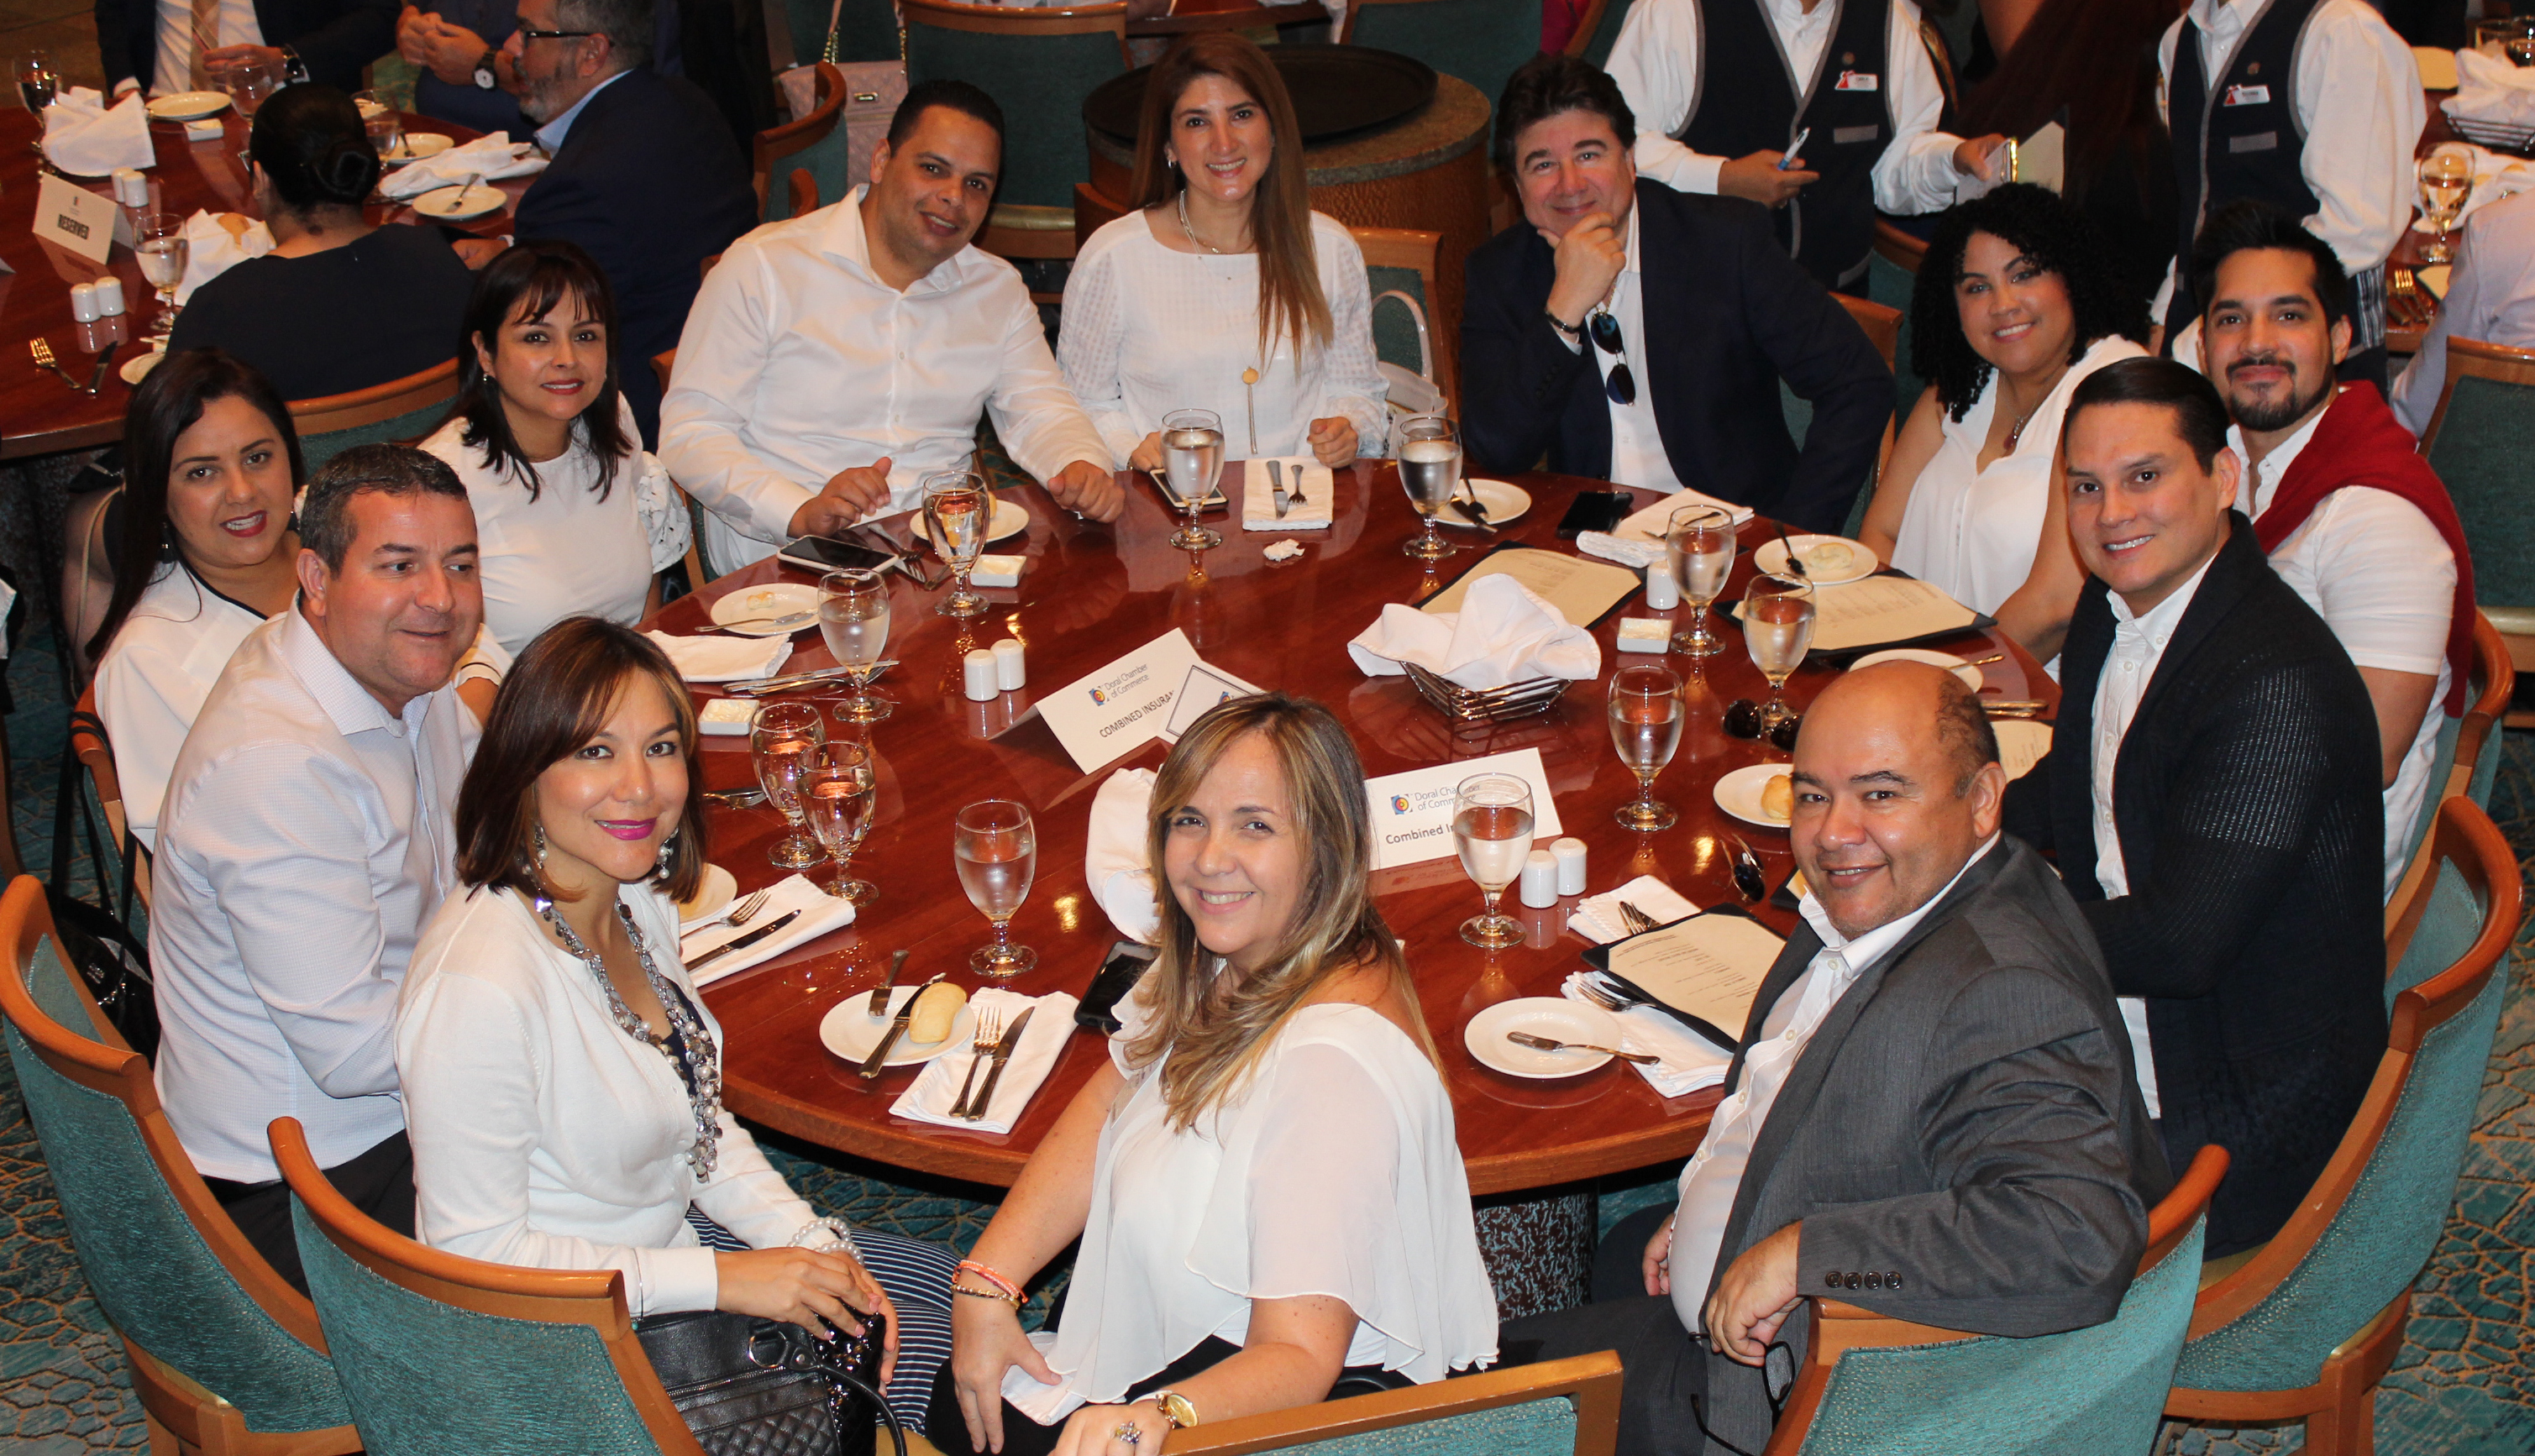 Doral Chamber of Commerce Carnival Cruise Luncheon 2019, Networking Event in Miami, Florida. Entire table taking a group photo.